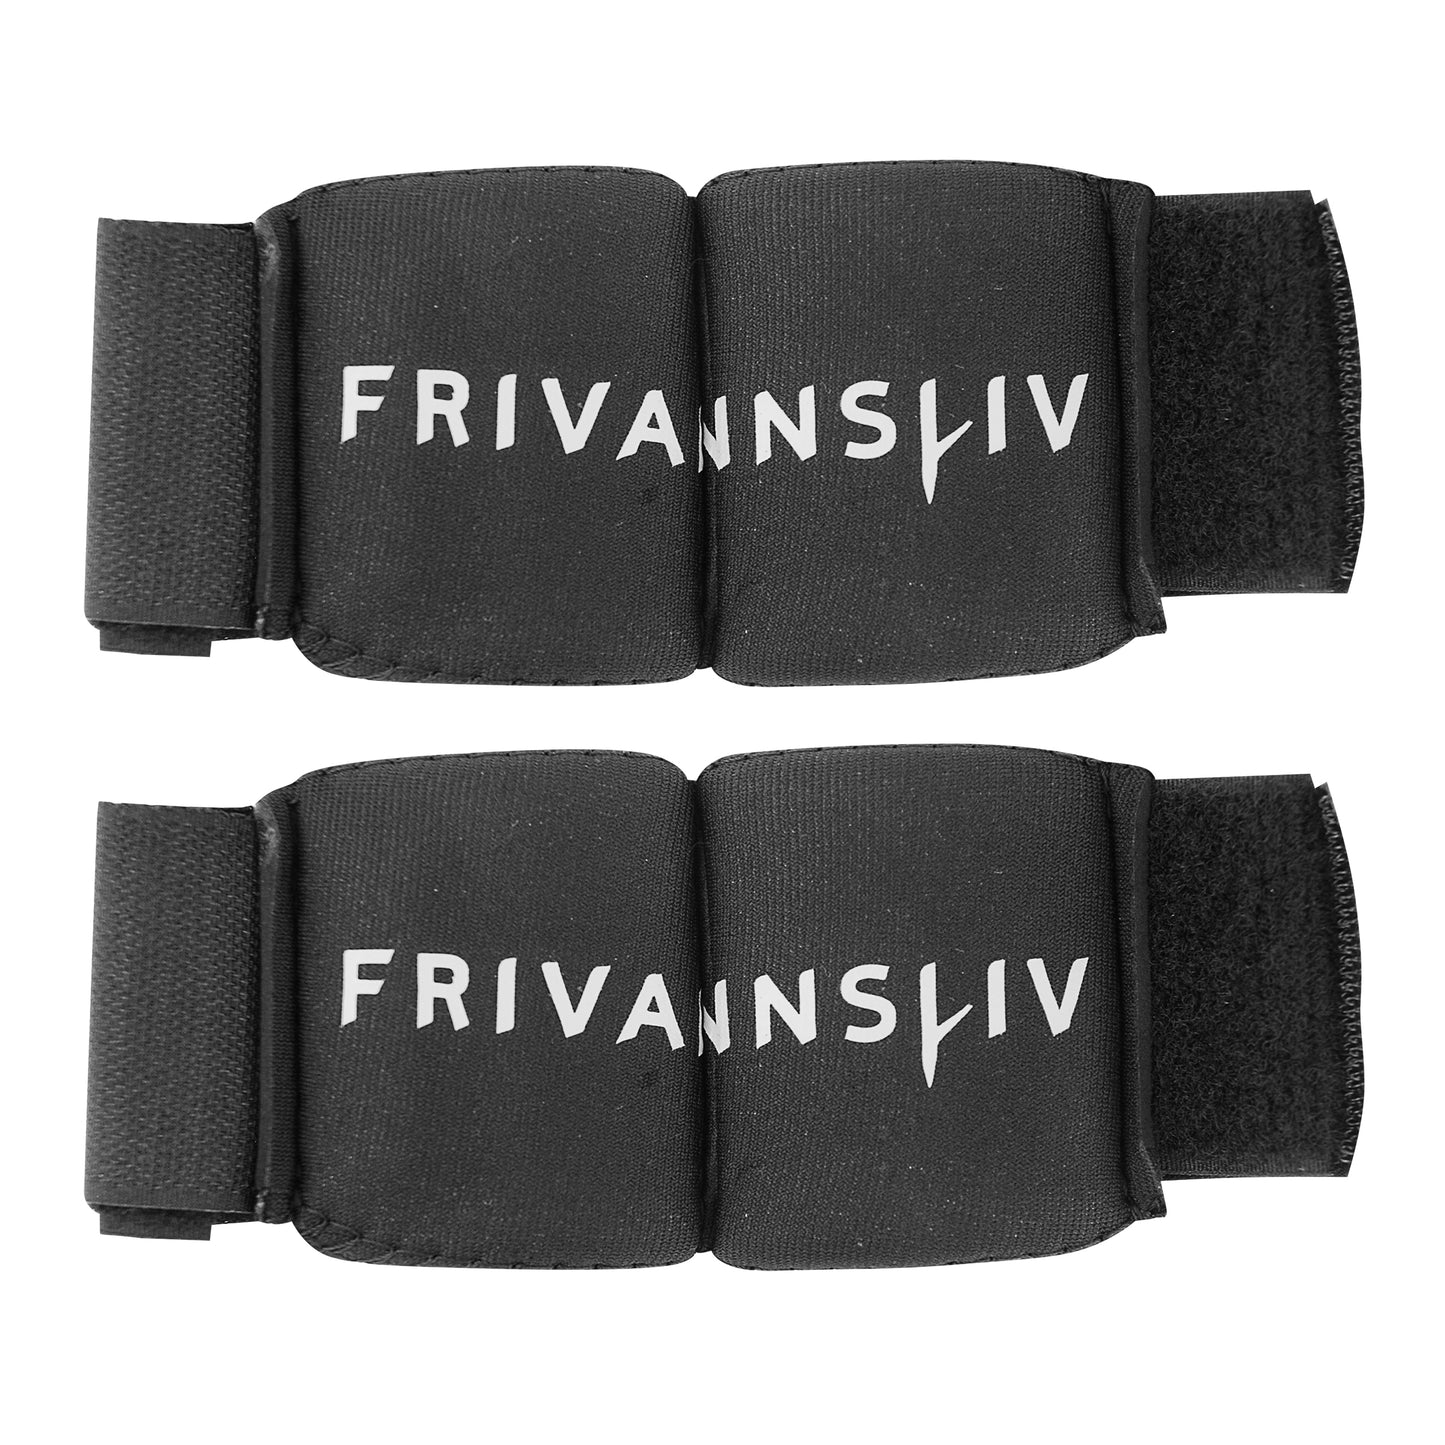 Frivannsliv® ankle weights Black